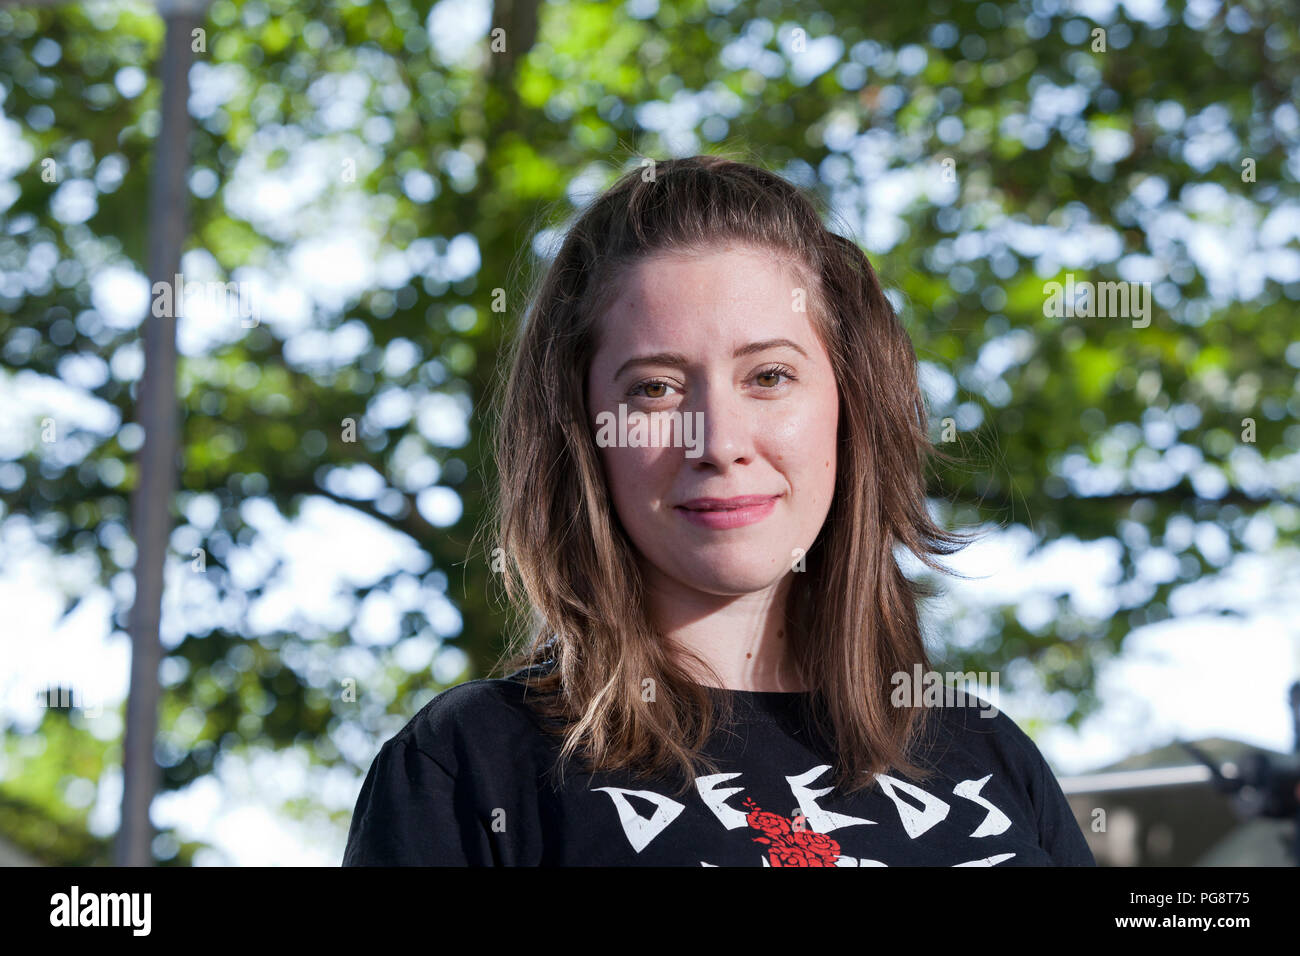 Edinburgh, UK. 25th August, 2018.  Dr Fern Riddell is a historian specialising in sex, suffrage and culture in the Victorian and Edwardian eras. Pictured at the Edinburgh International Book Festival. Edinburgh, Scotland.  Picture by Gary Doak / Alamy Live News Stock Photo